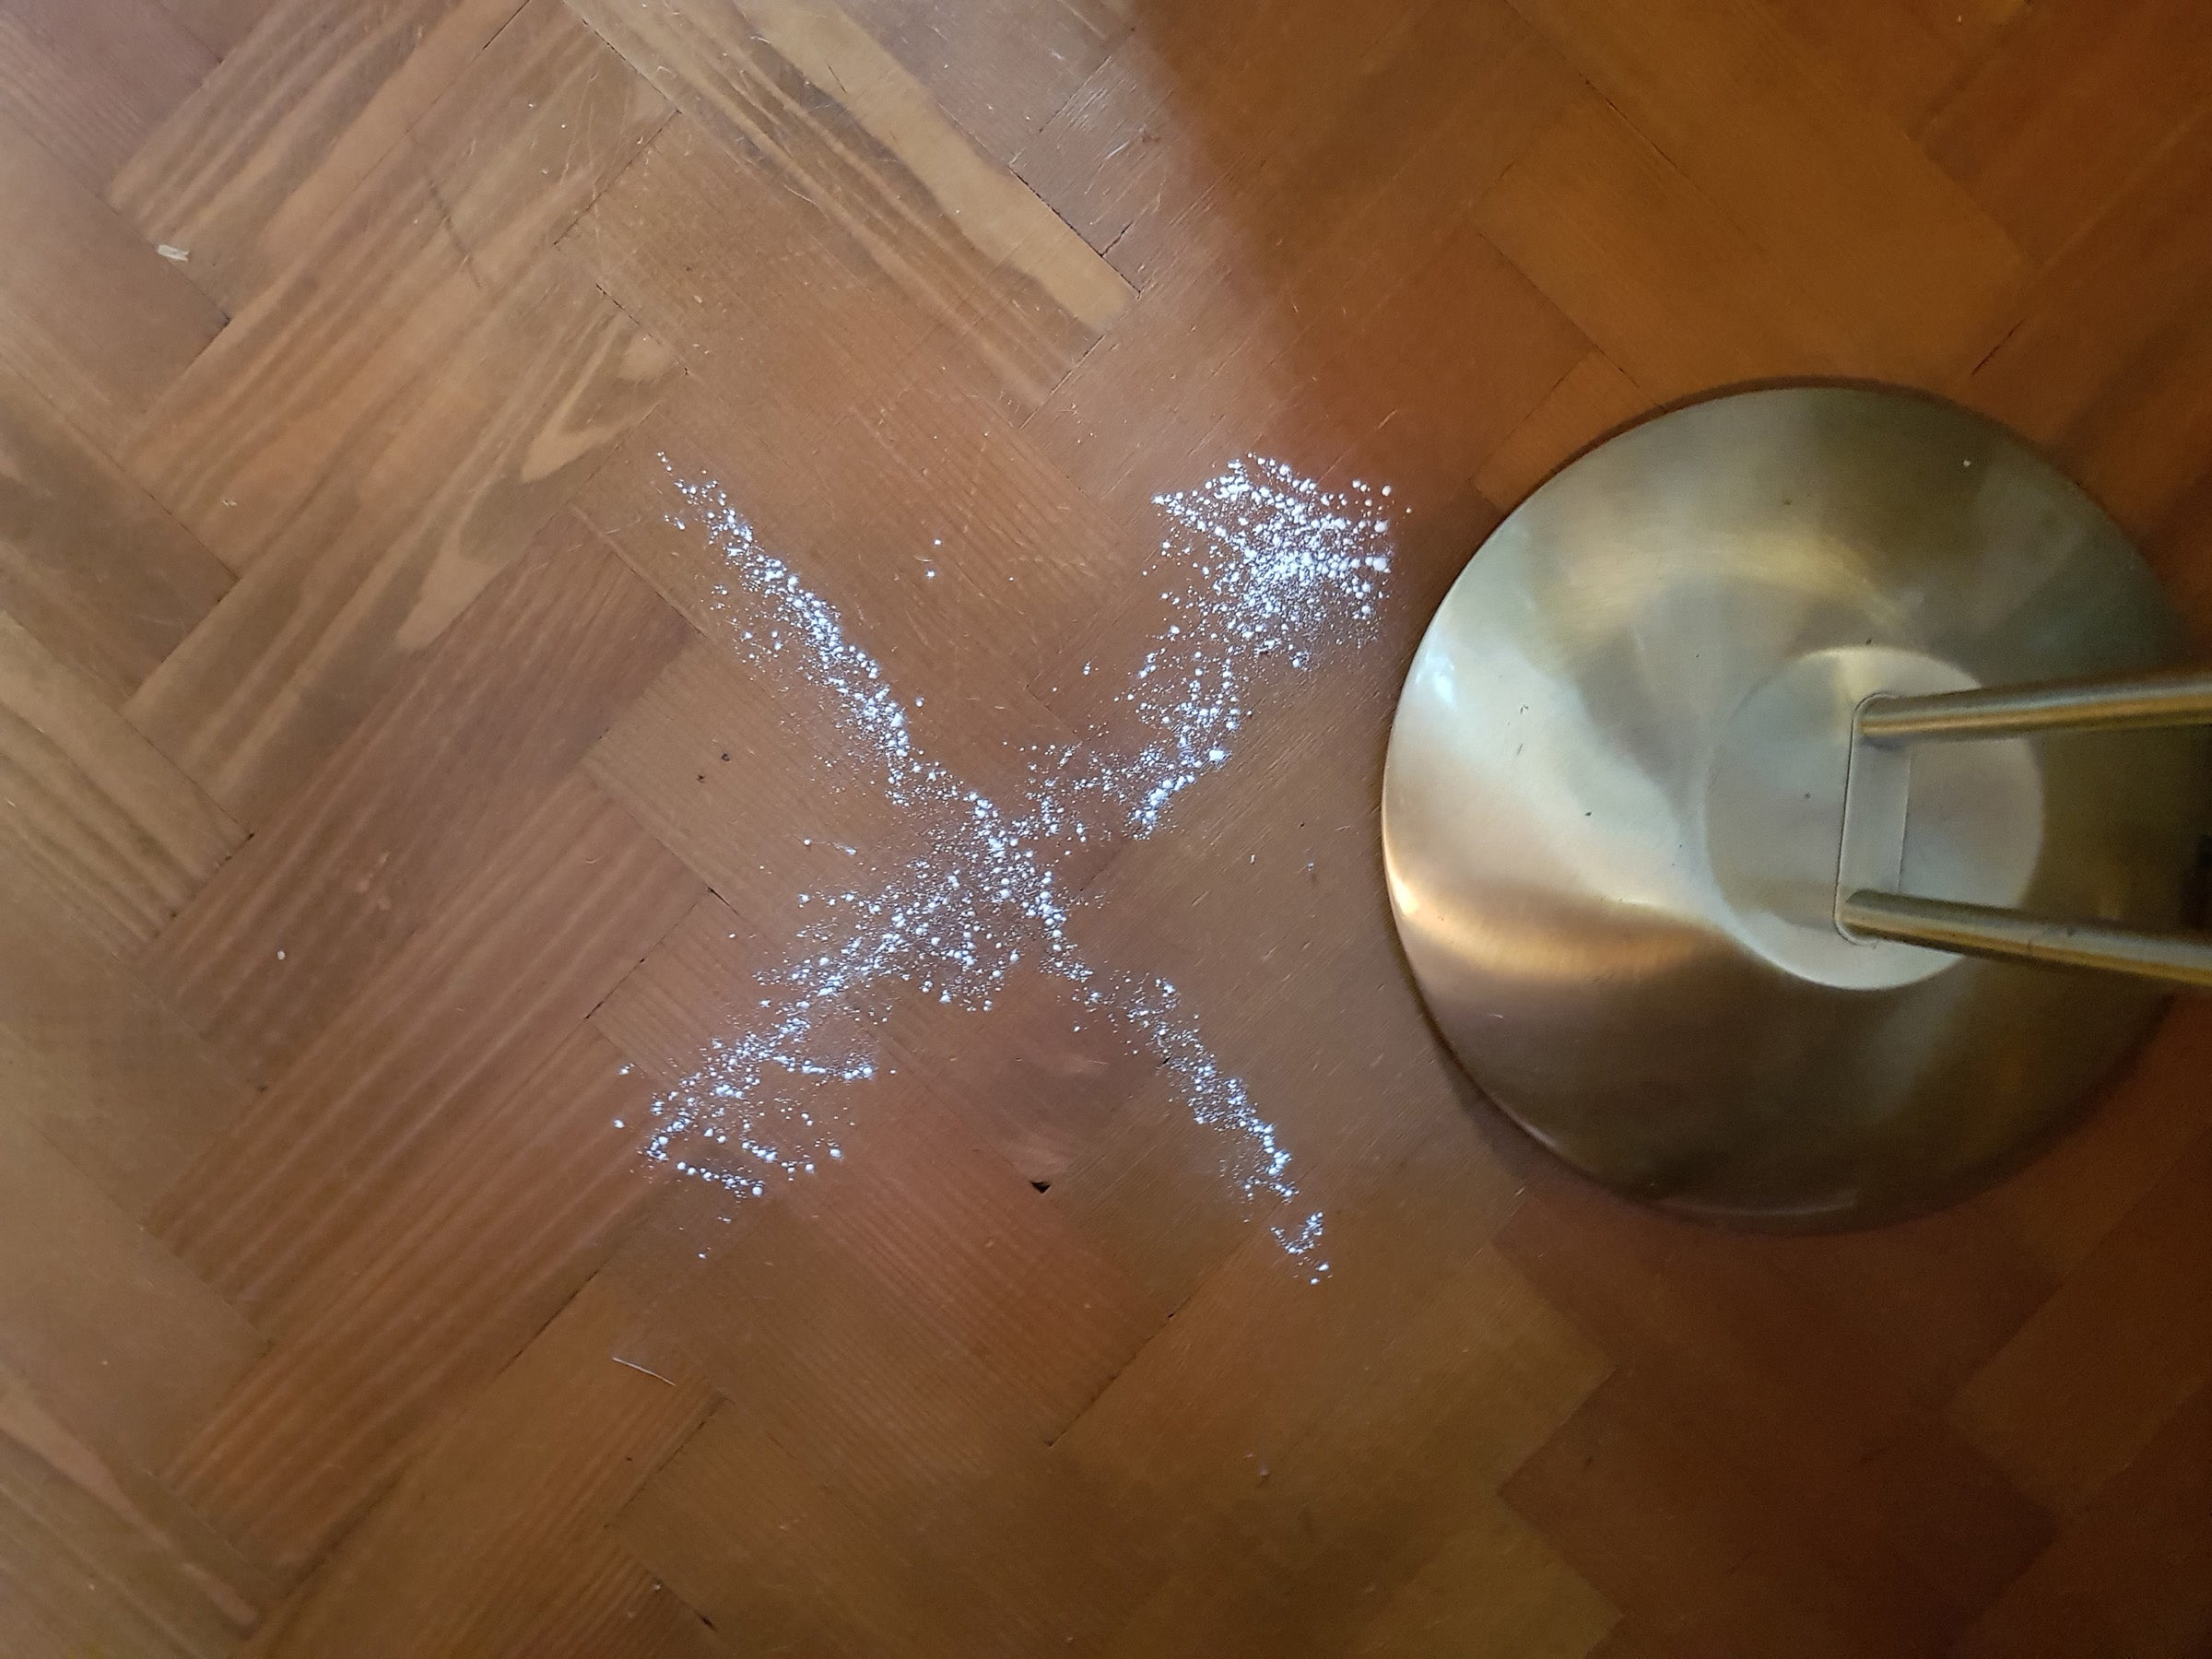 Spilled sugar next to a lamp on a wooden floor.